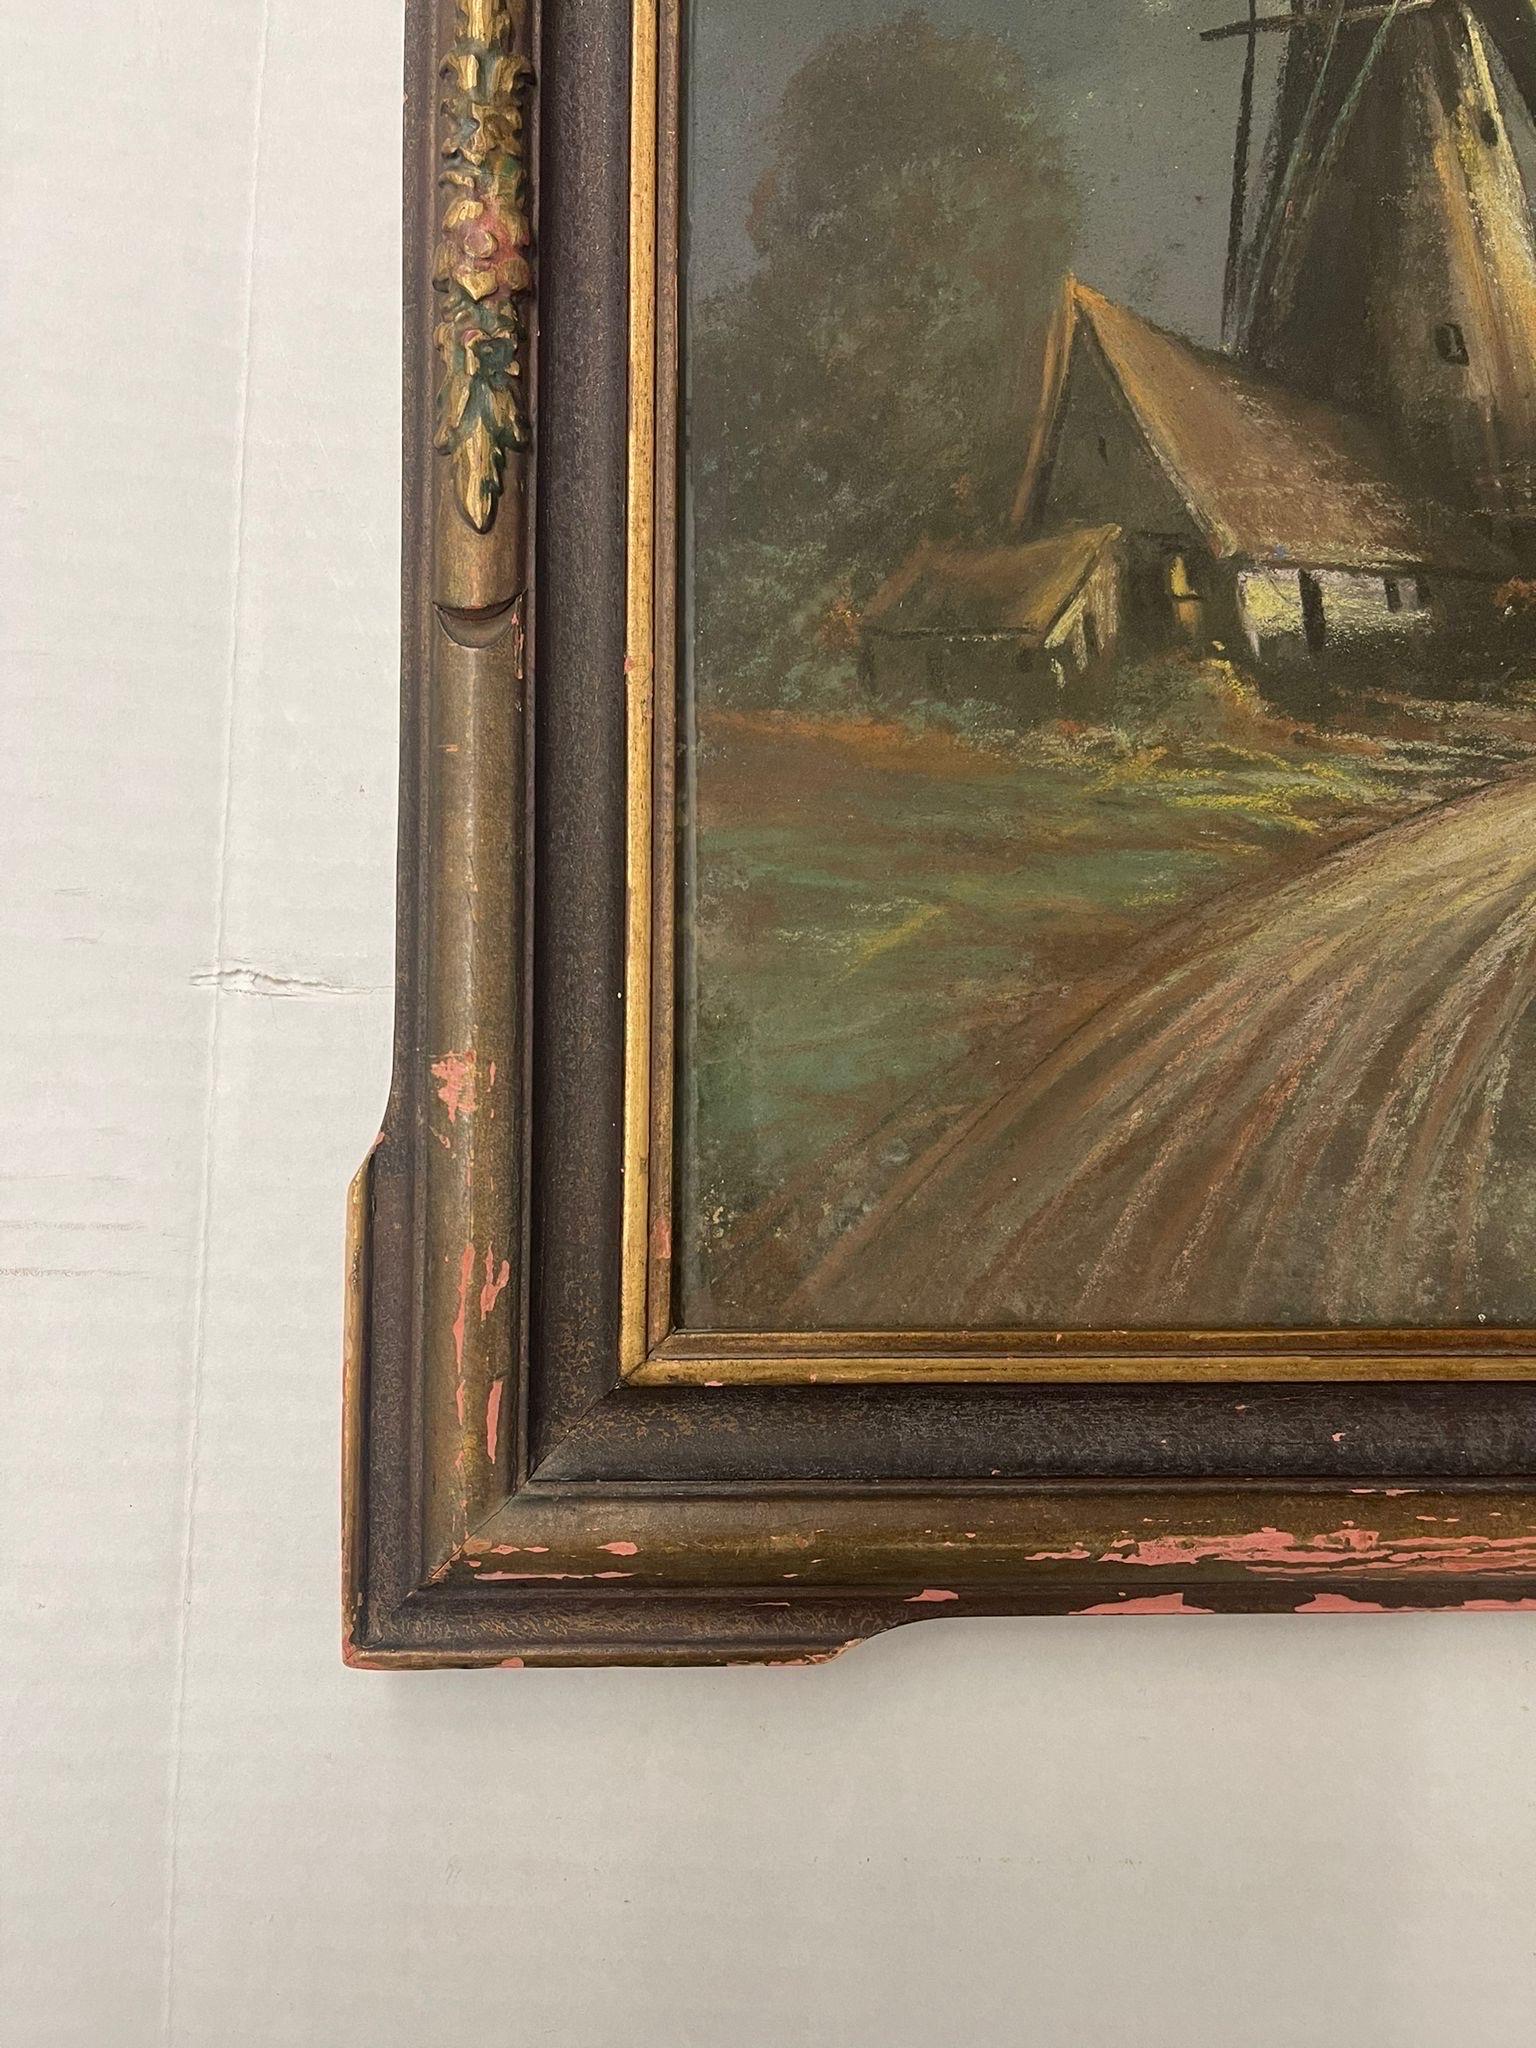 Early 20th Century Vintage Original Landscape Windmill Artwork Within Victorian Style Frame. For Sale